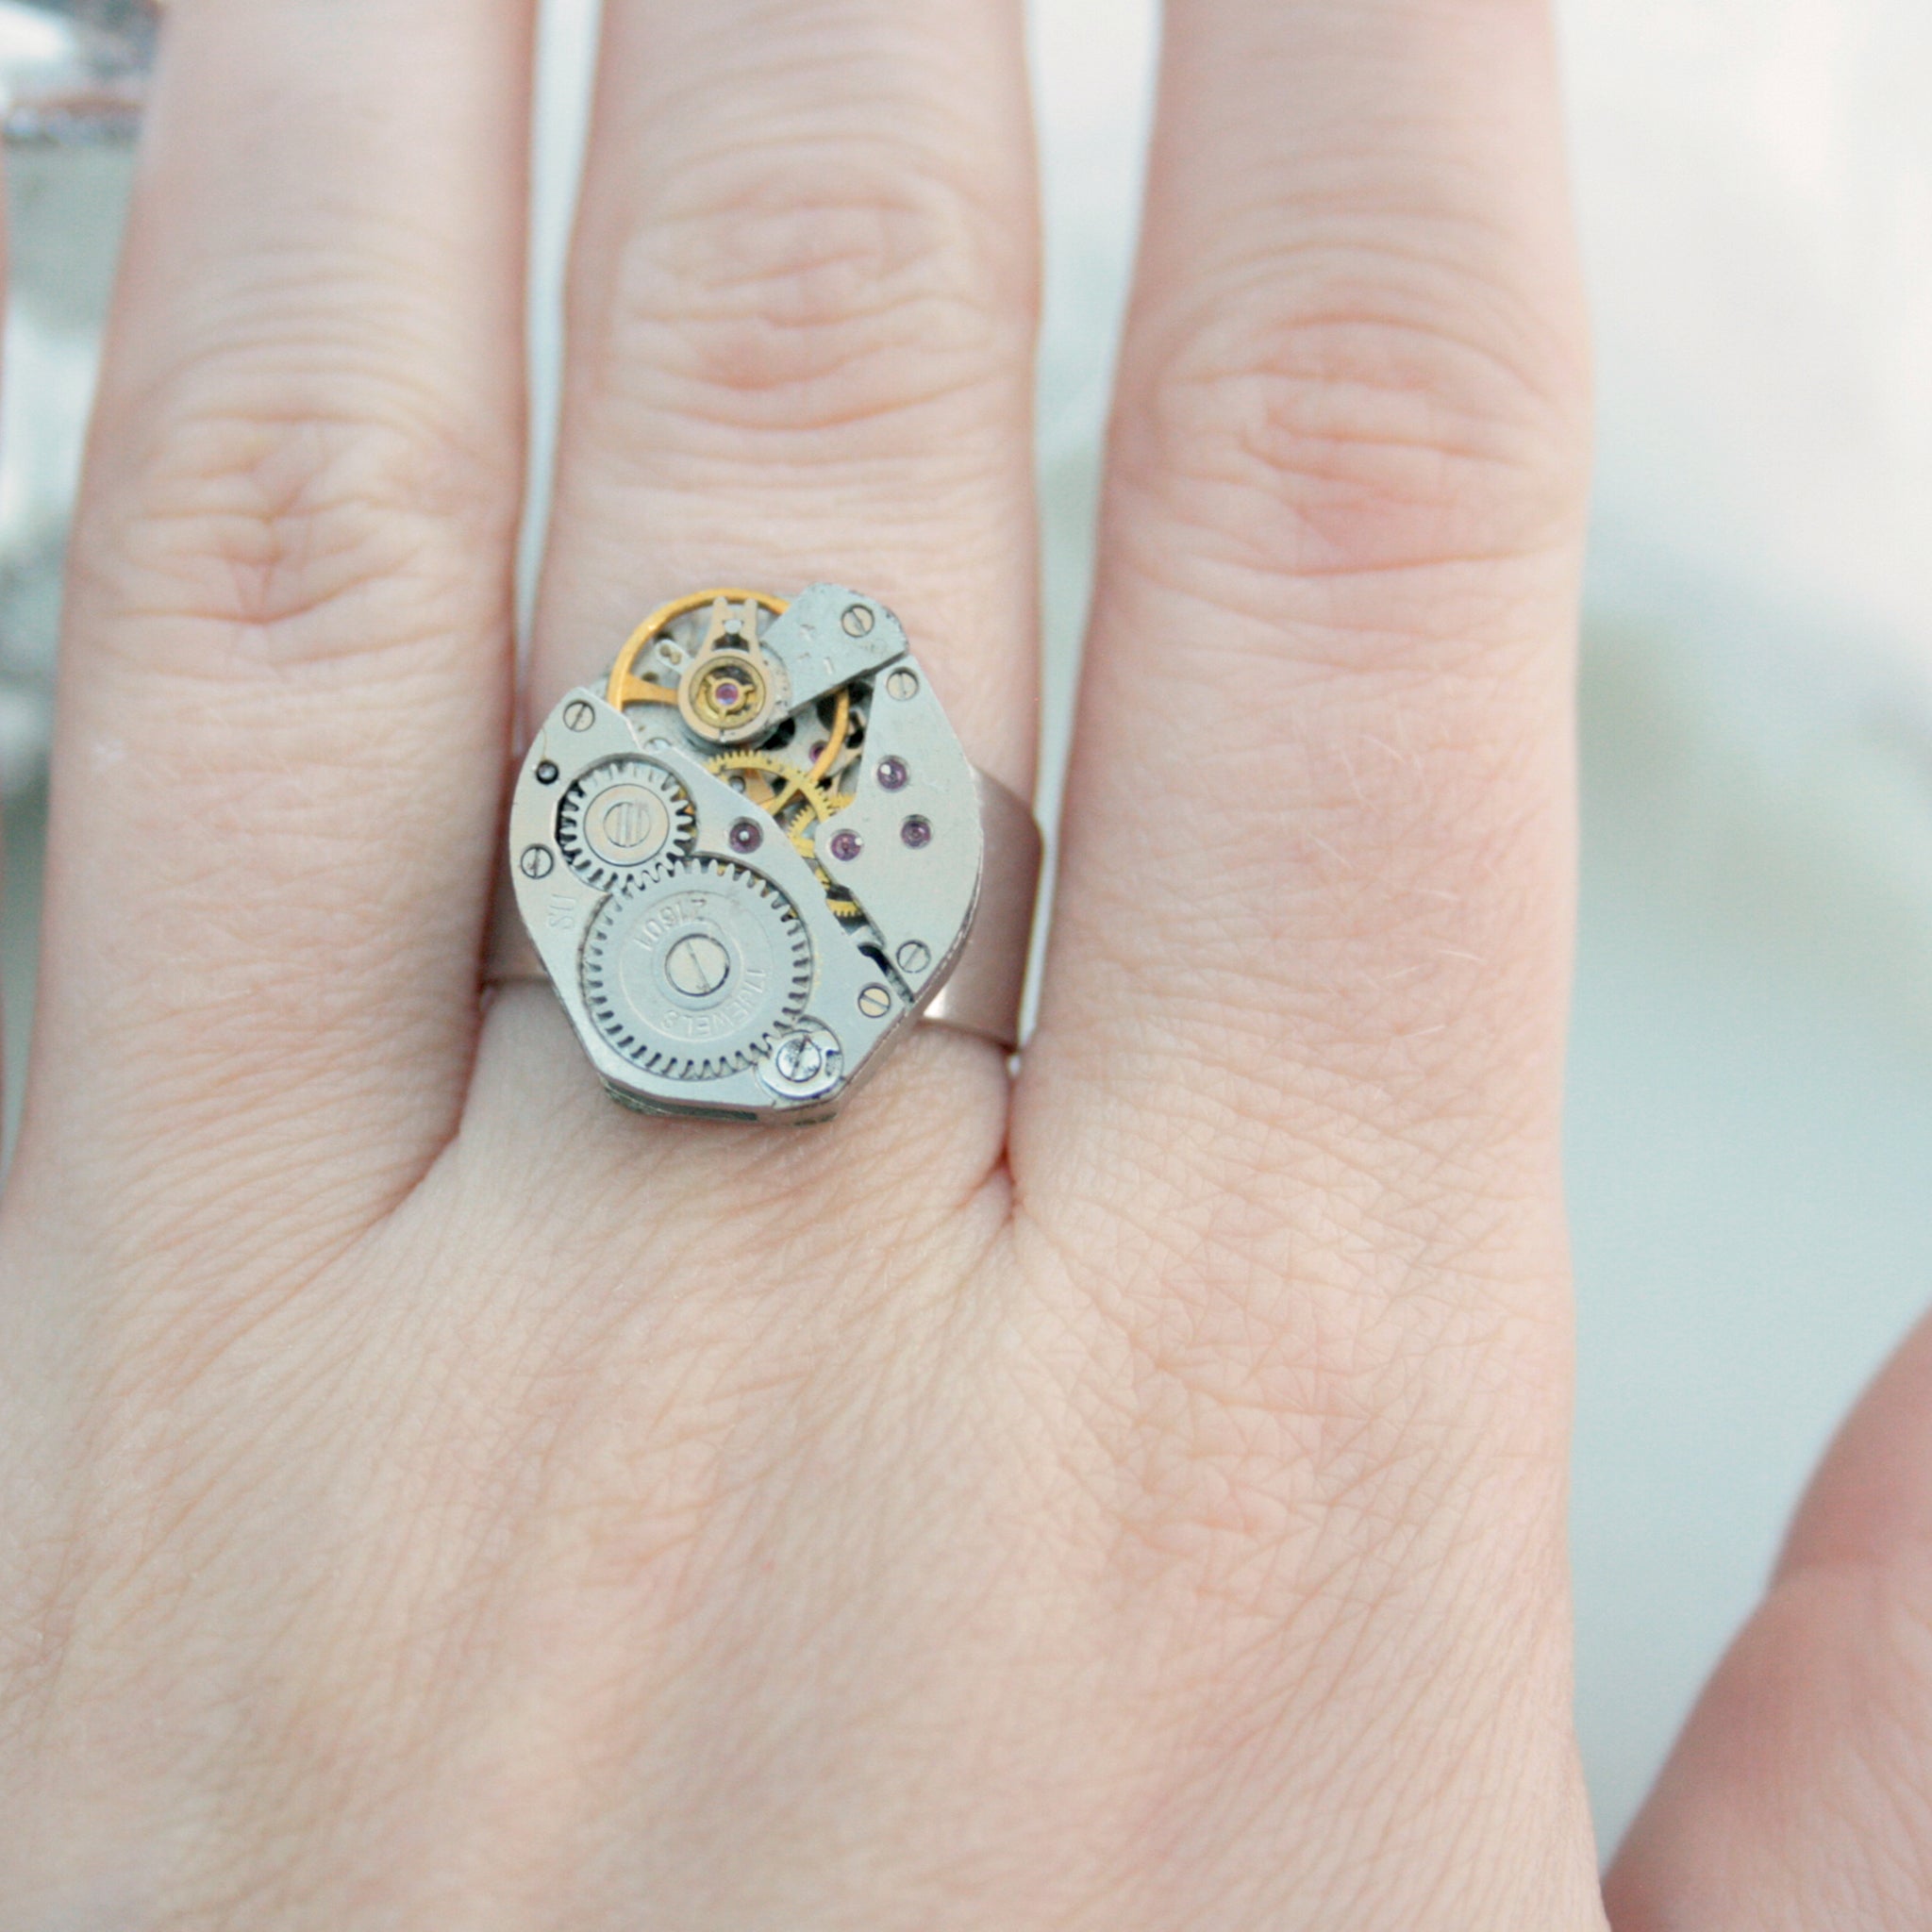 Steampunk Signet Ring made of real watch on a hand